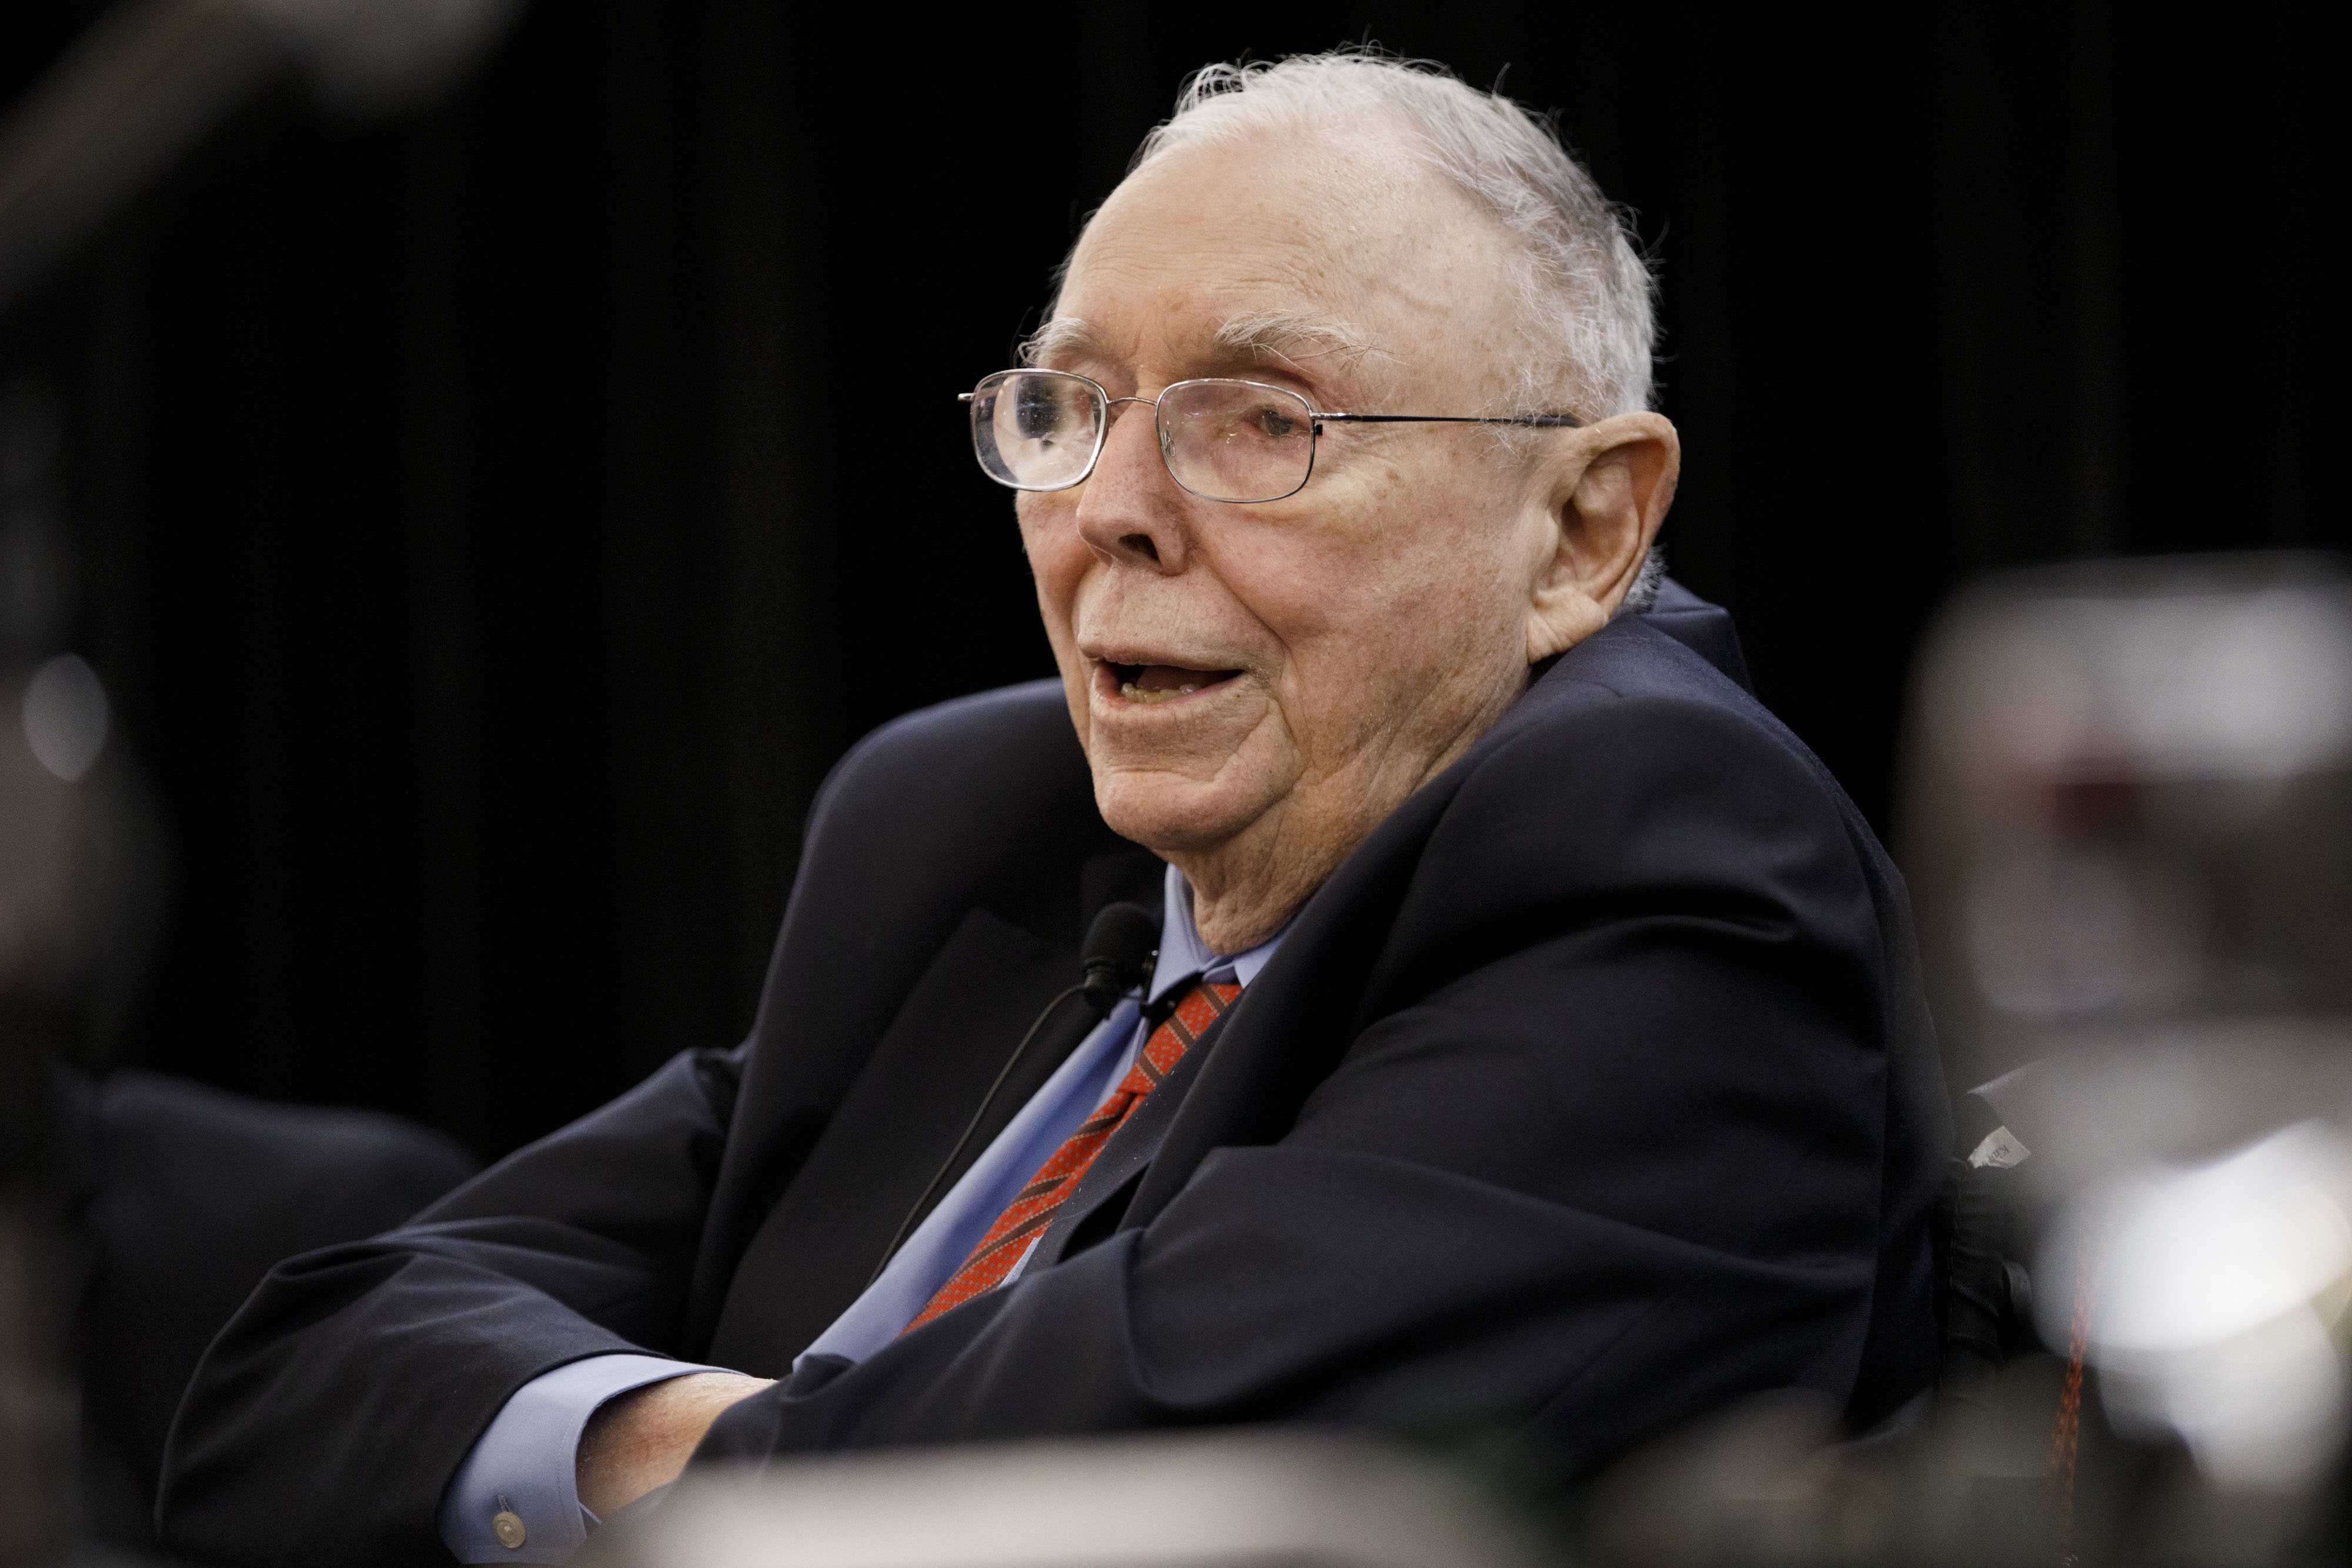 Charlie Munger, vice chairman of Berkshire Hathaway, speaks during the Daily Journal Corporation shareholder meeting in Los Angeles, California, on February 14, 2019. 